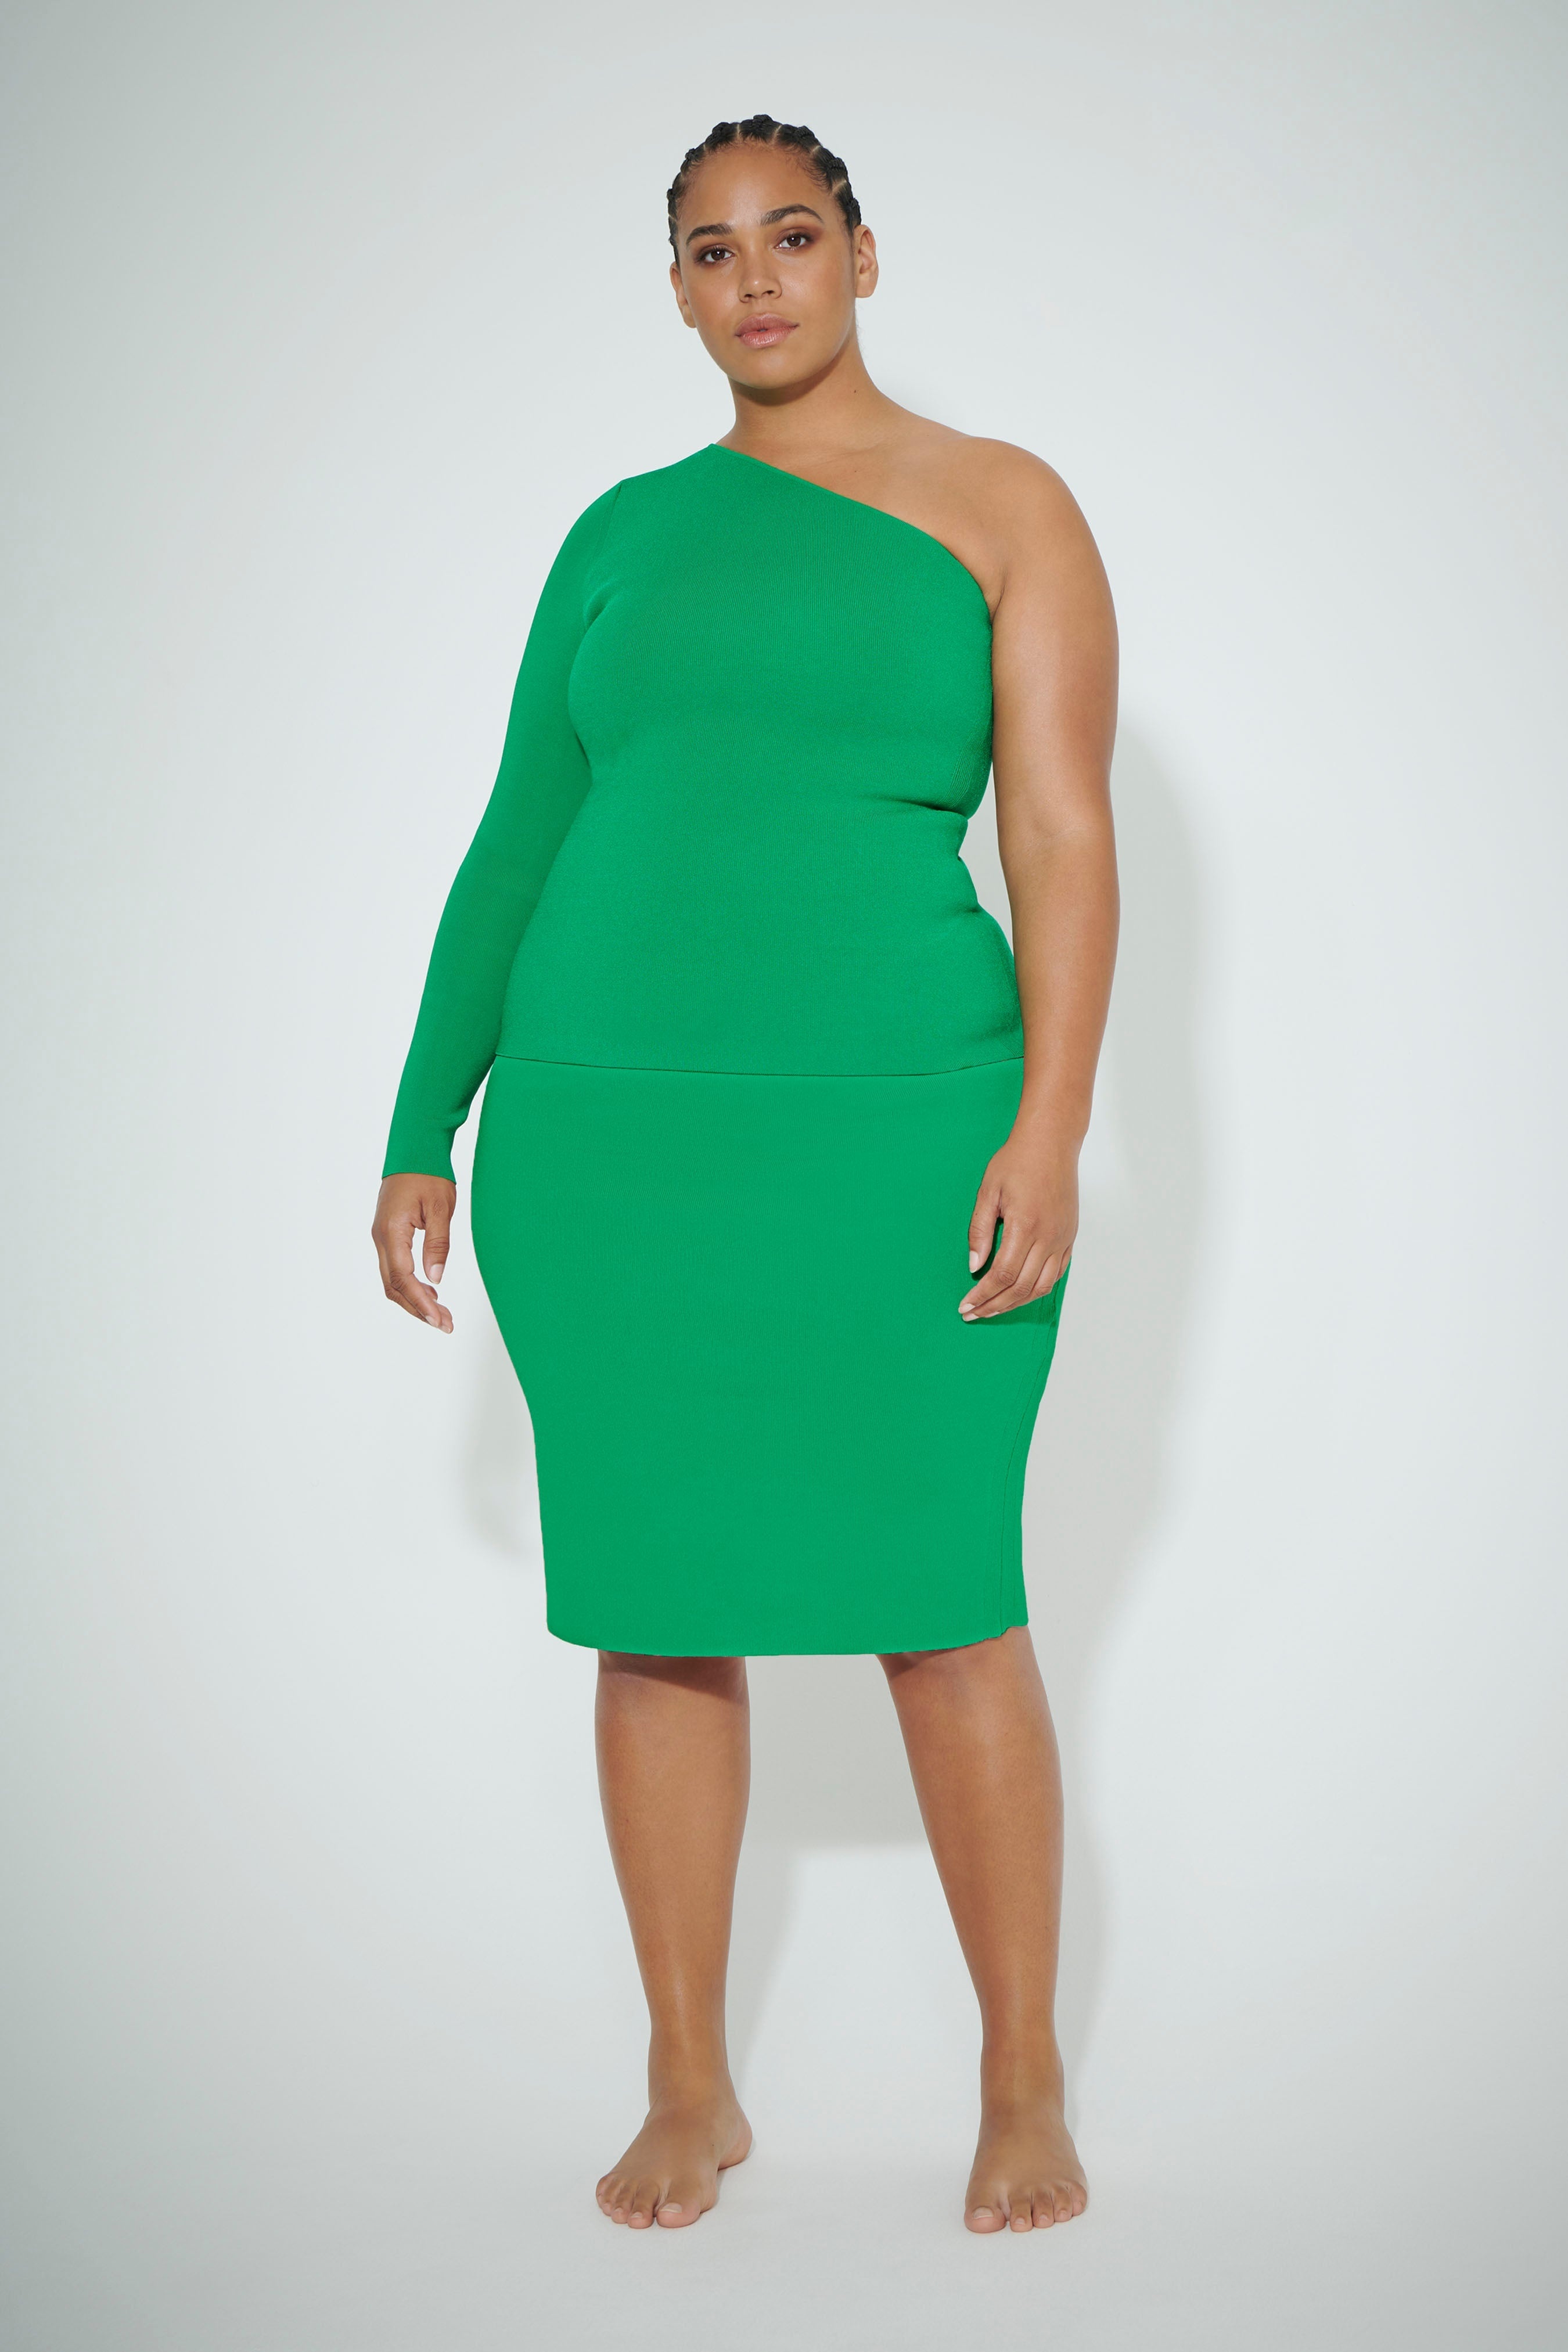 VB Body Fitted Midi Skirt in Green - 6